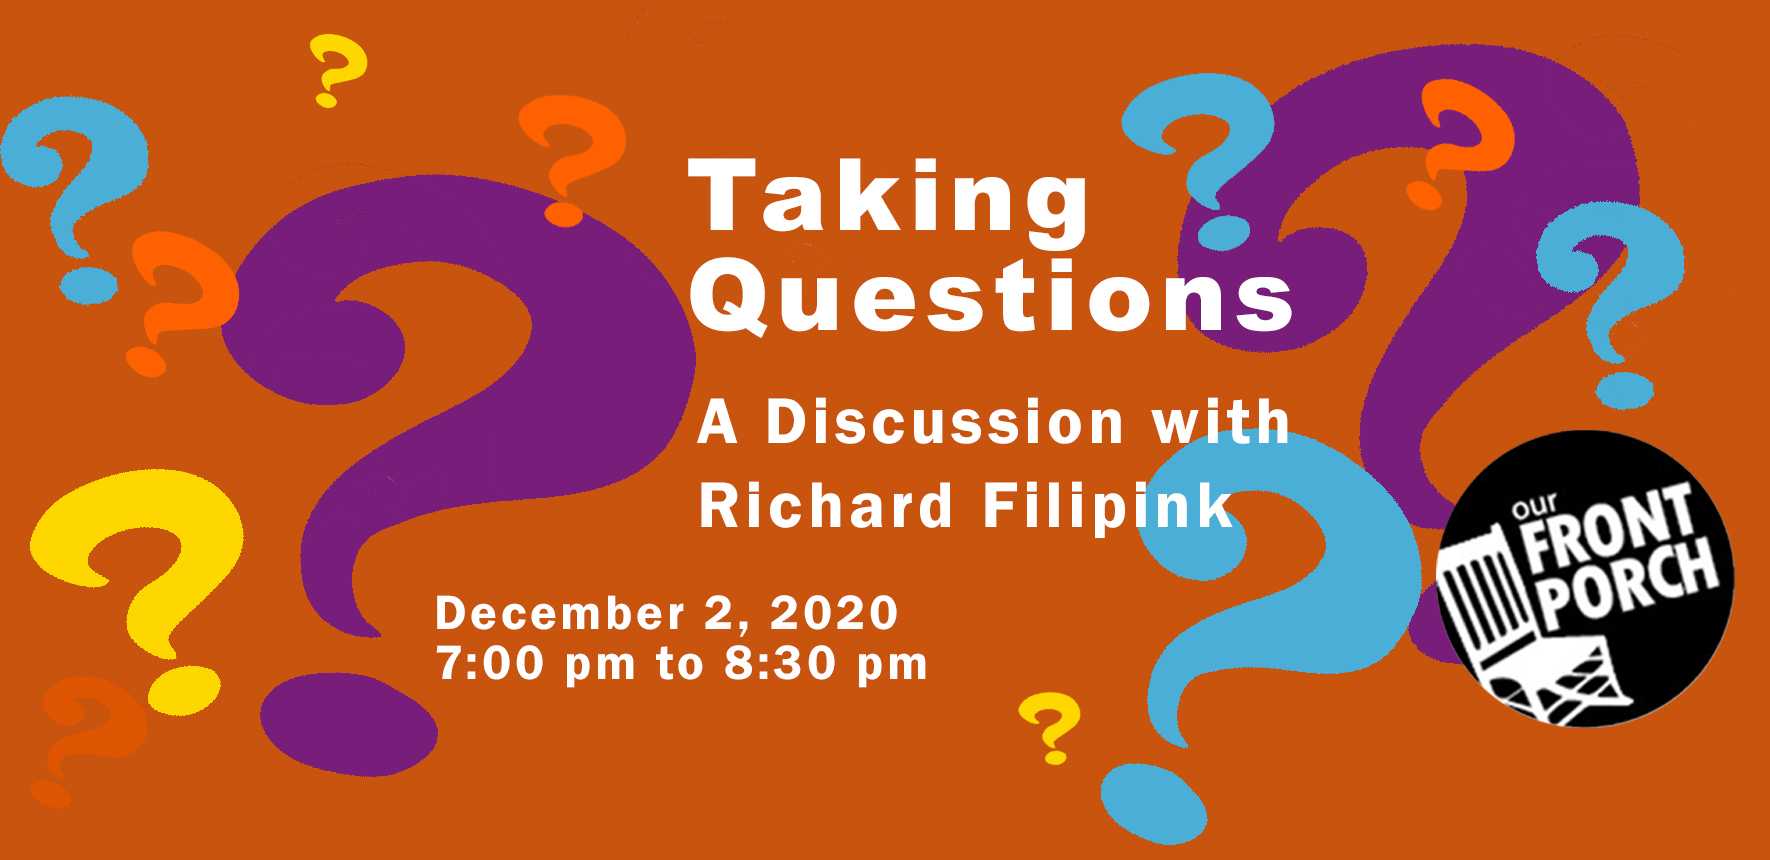 Taking Questions with Richard Filipink